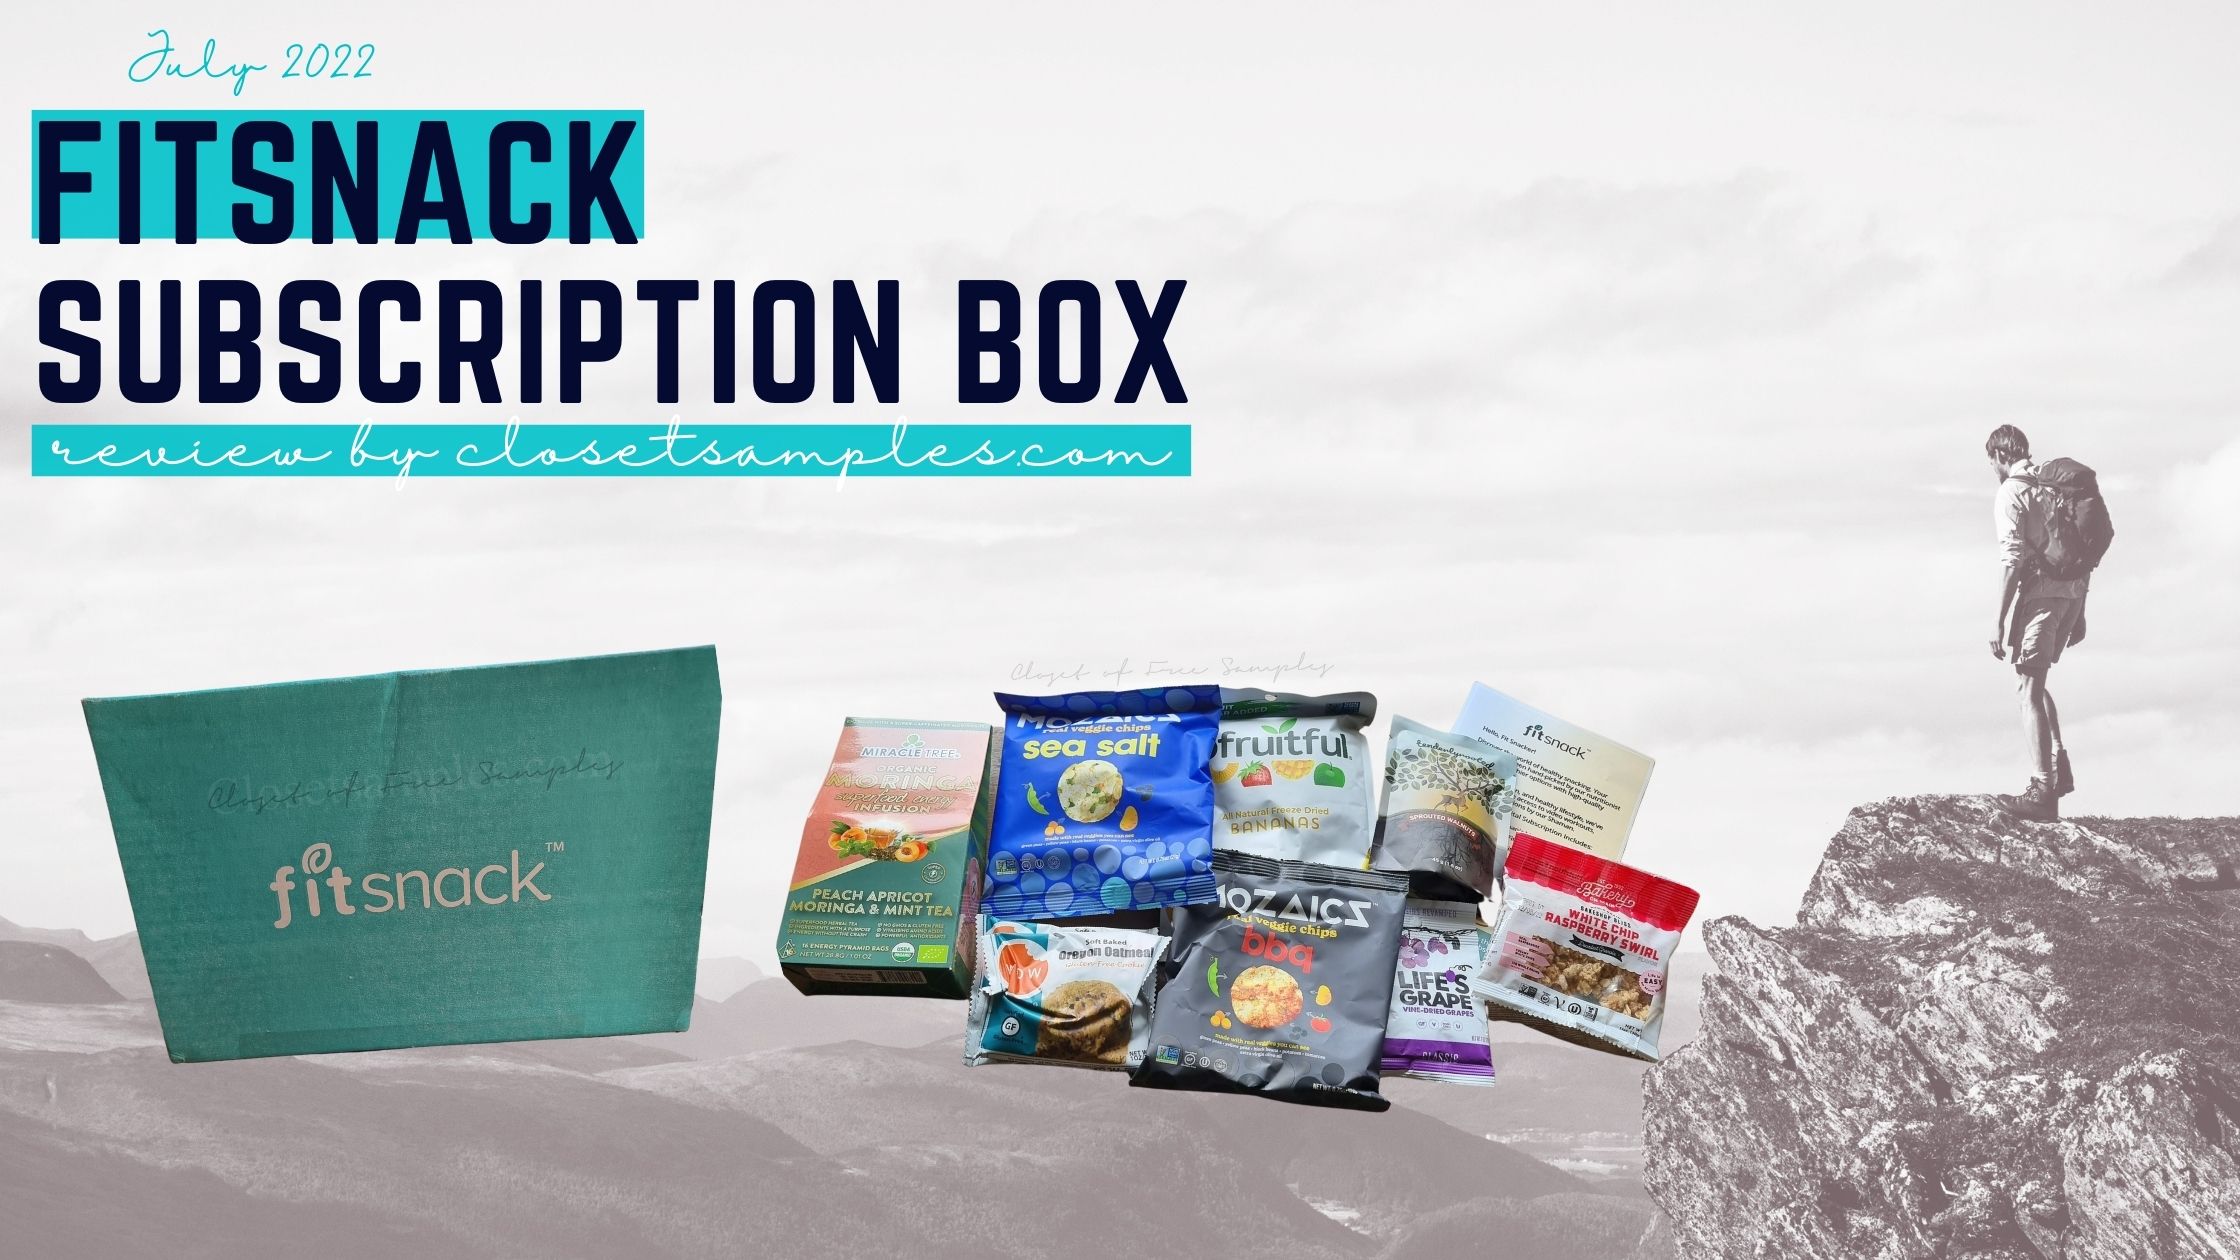 FitSnack Subscription Box July 2022 Review closetsamples